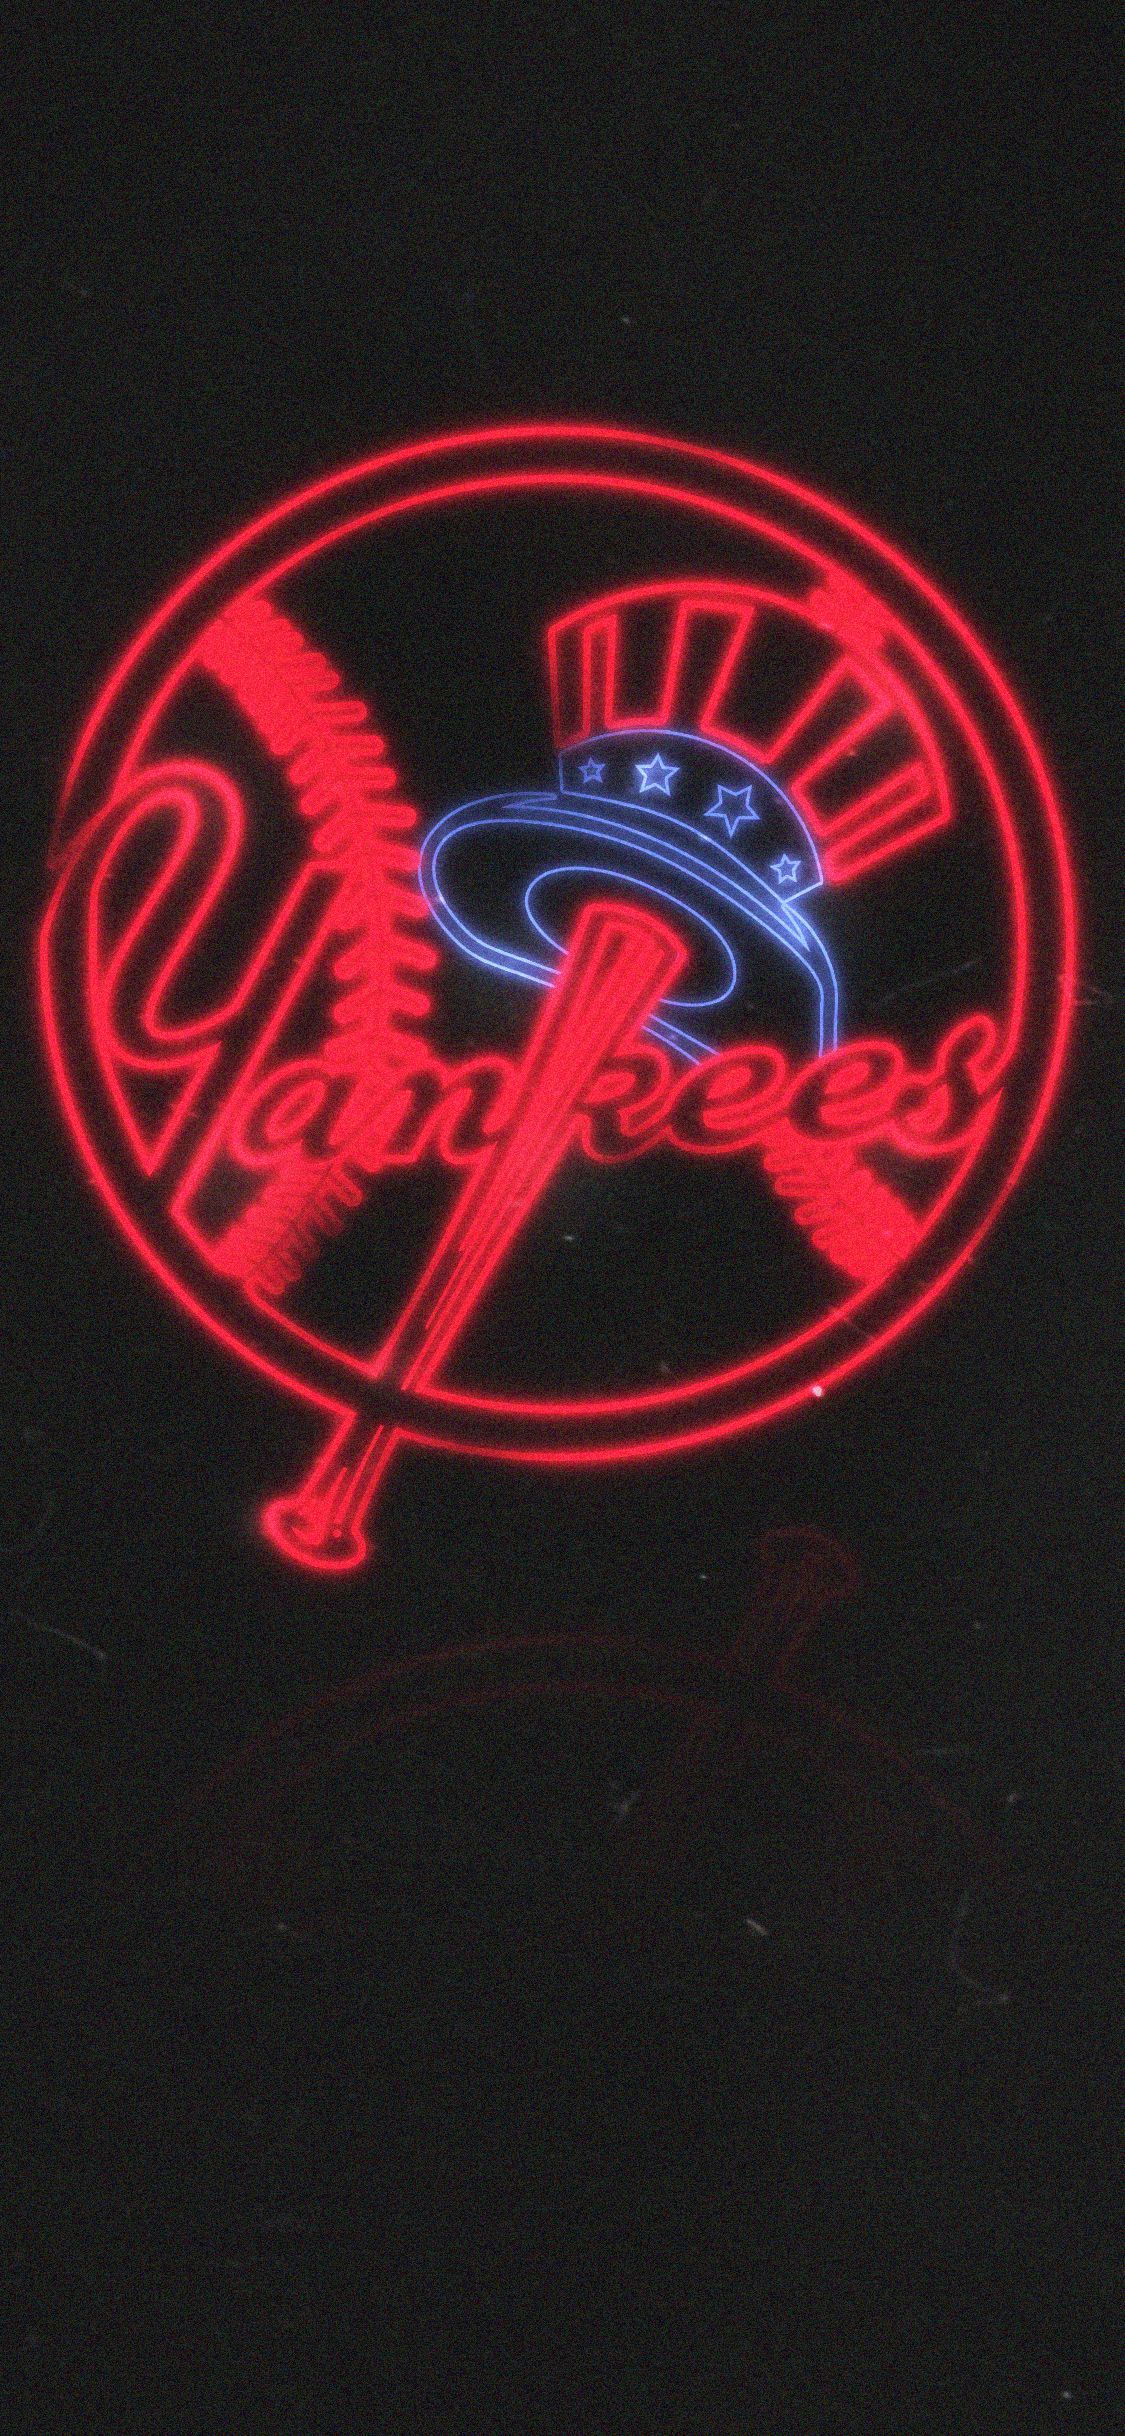 I made some Stranger Things inspired cellphone wallpaper for my favorite sports teams. Go Yanks!